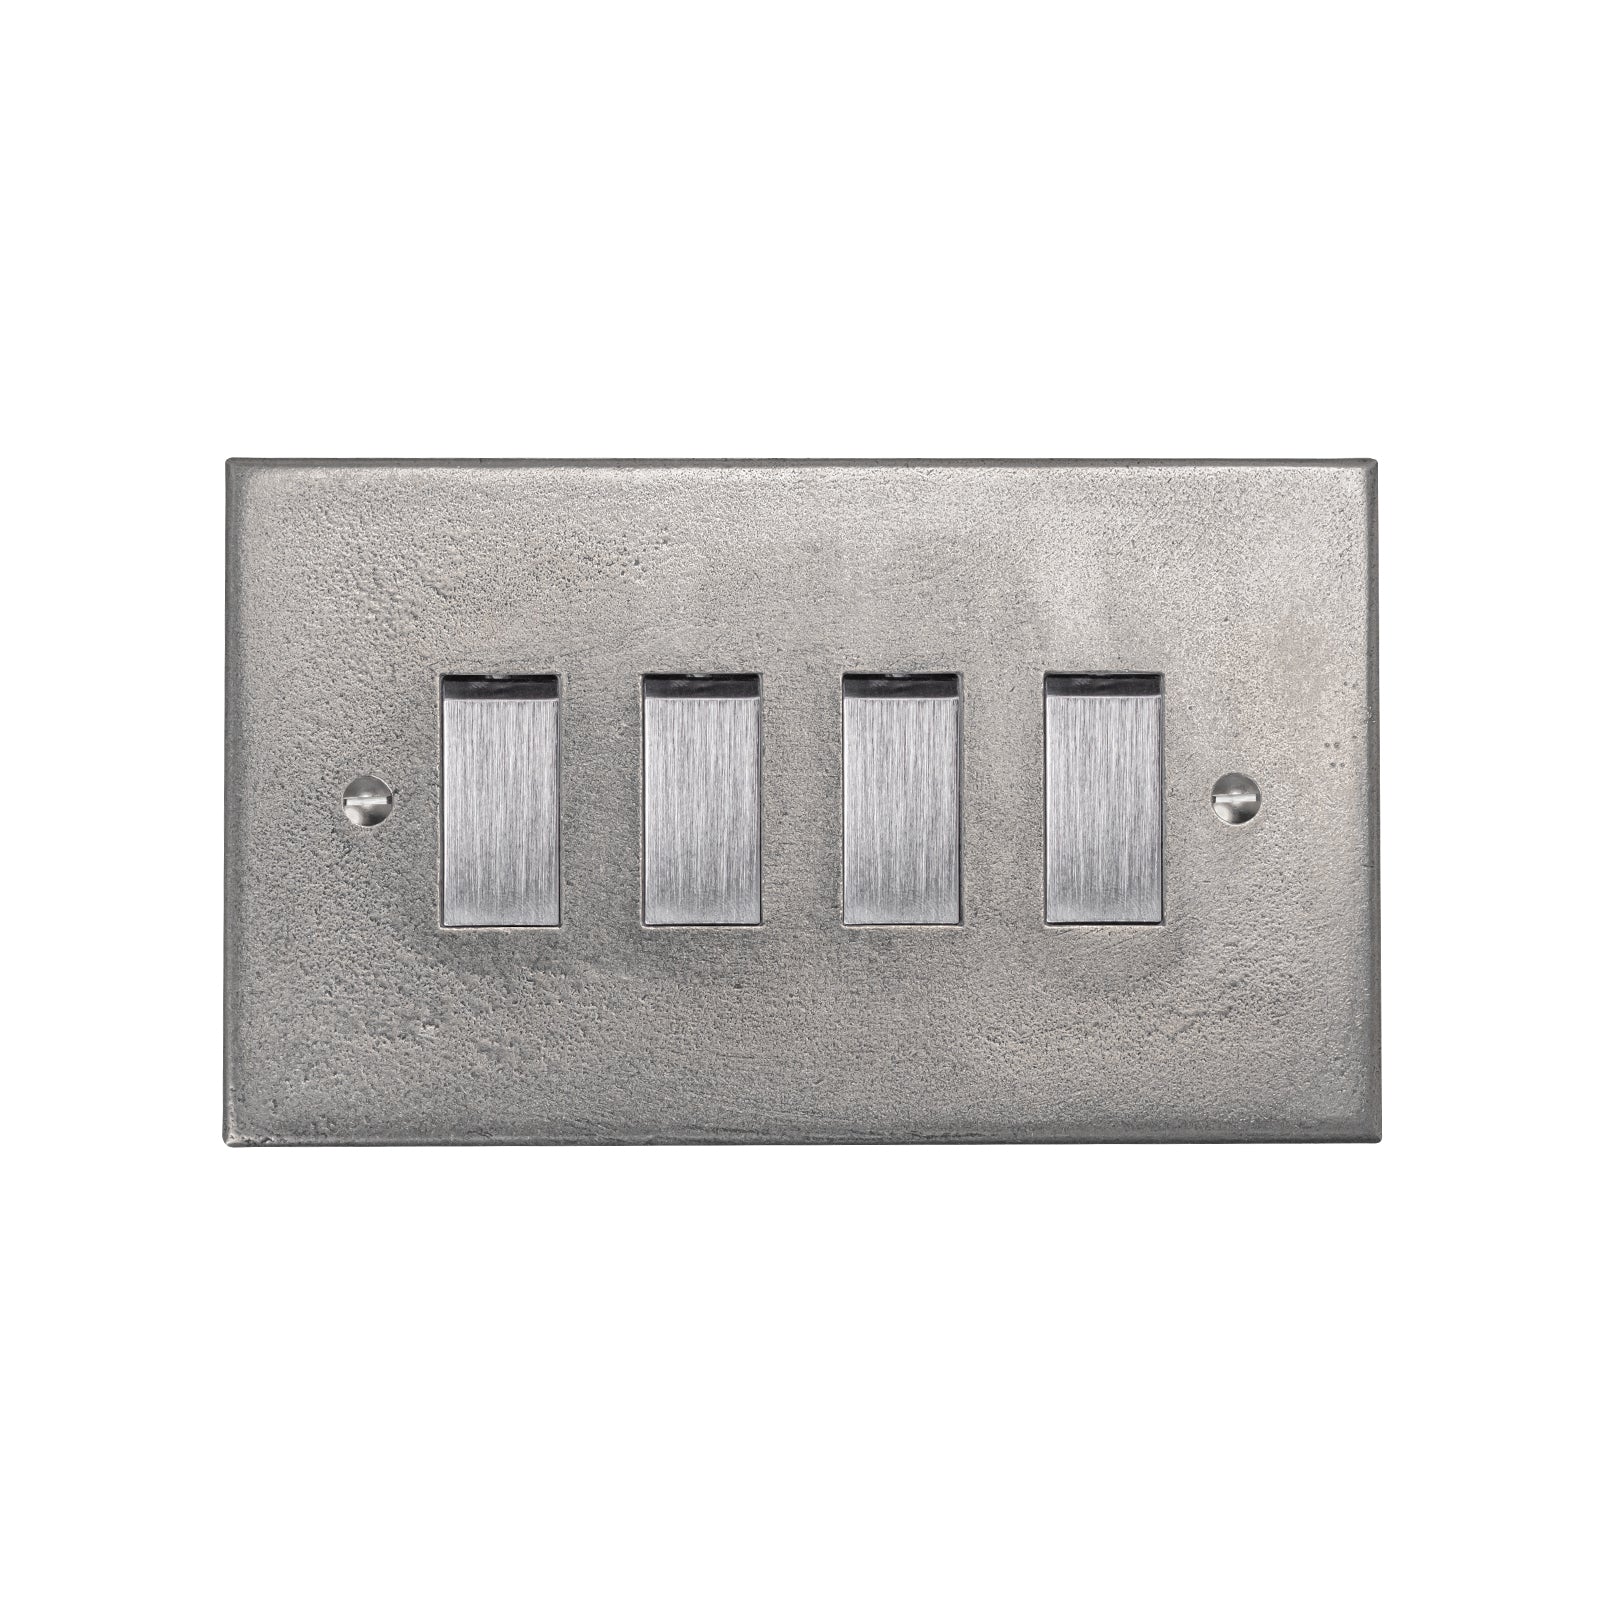 Pewter 4 Gang Light Switch